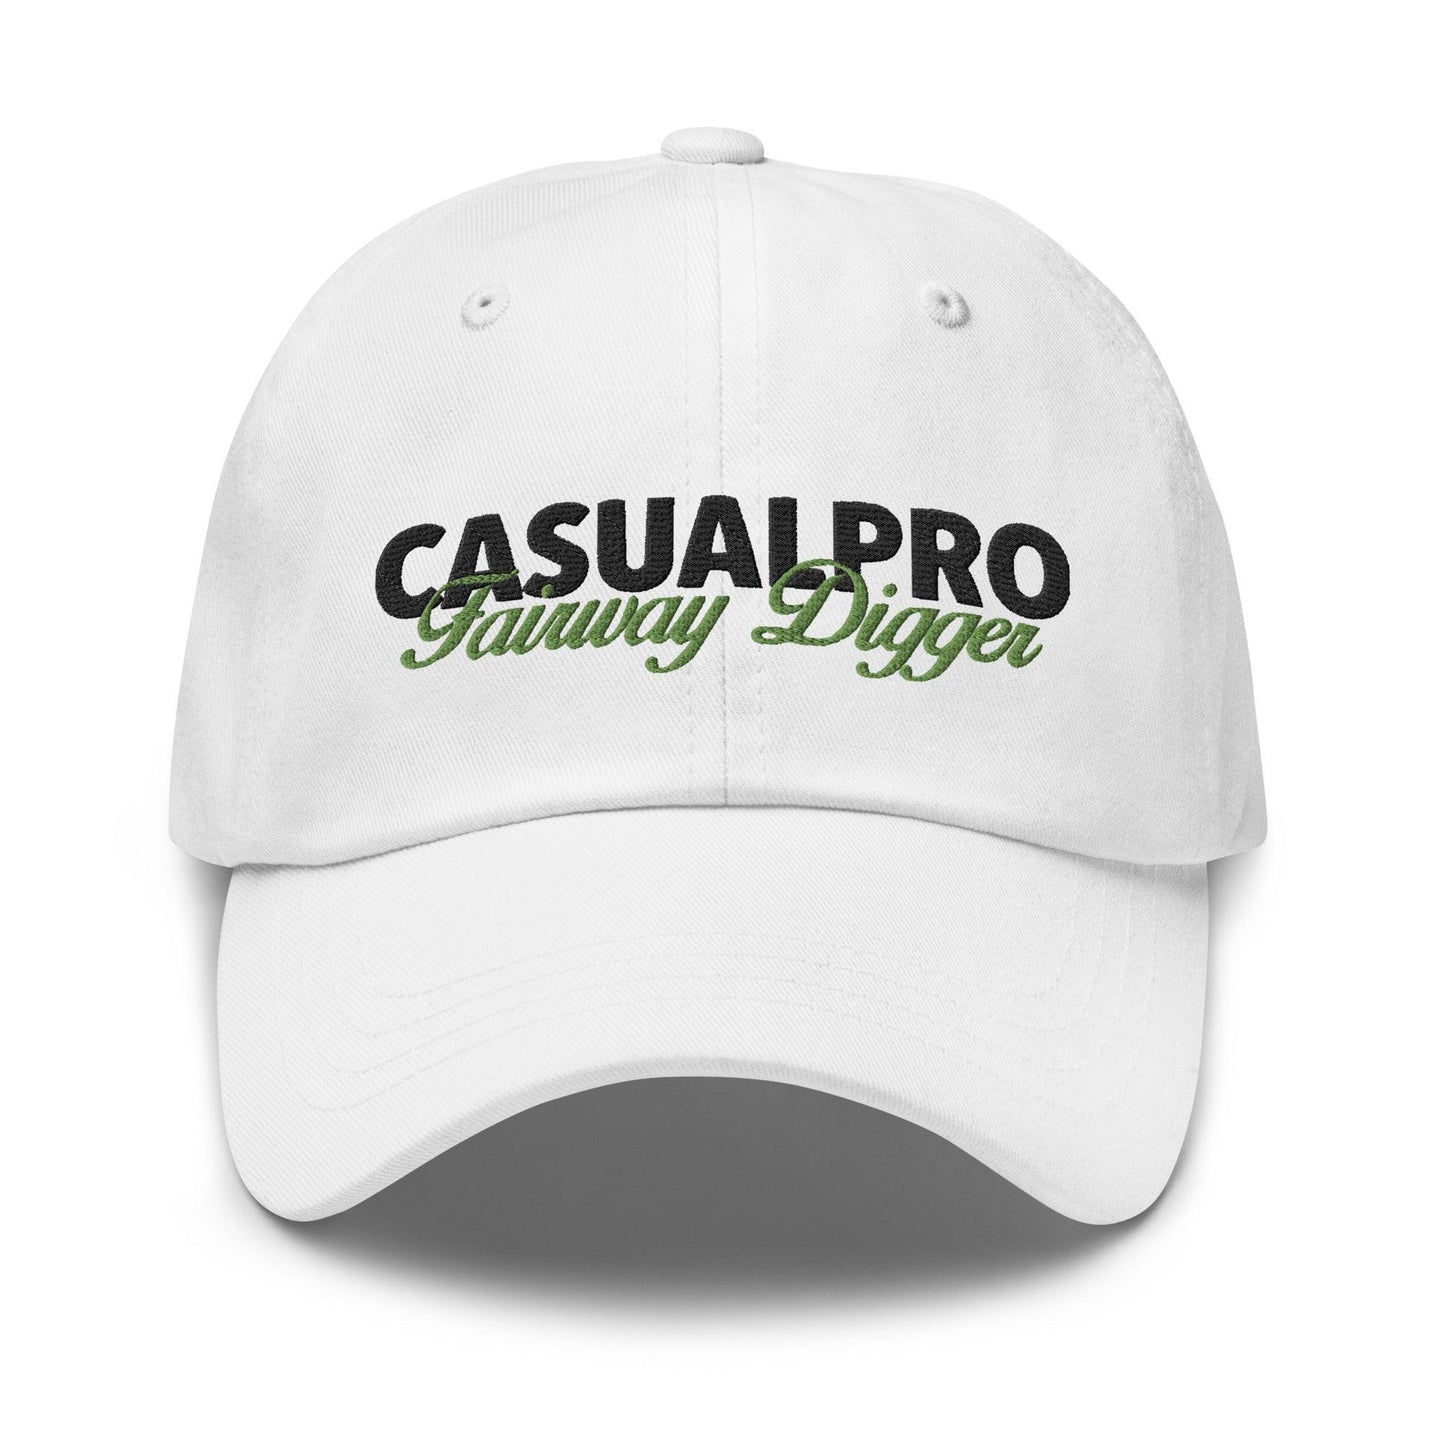 Fairway Digger - White Dad hat - CasualPro